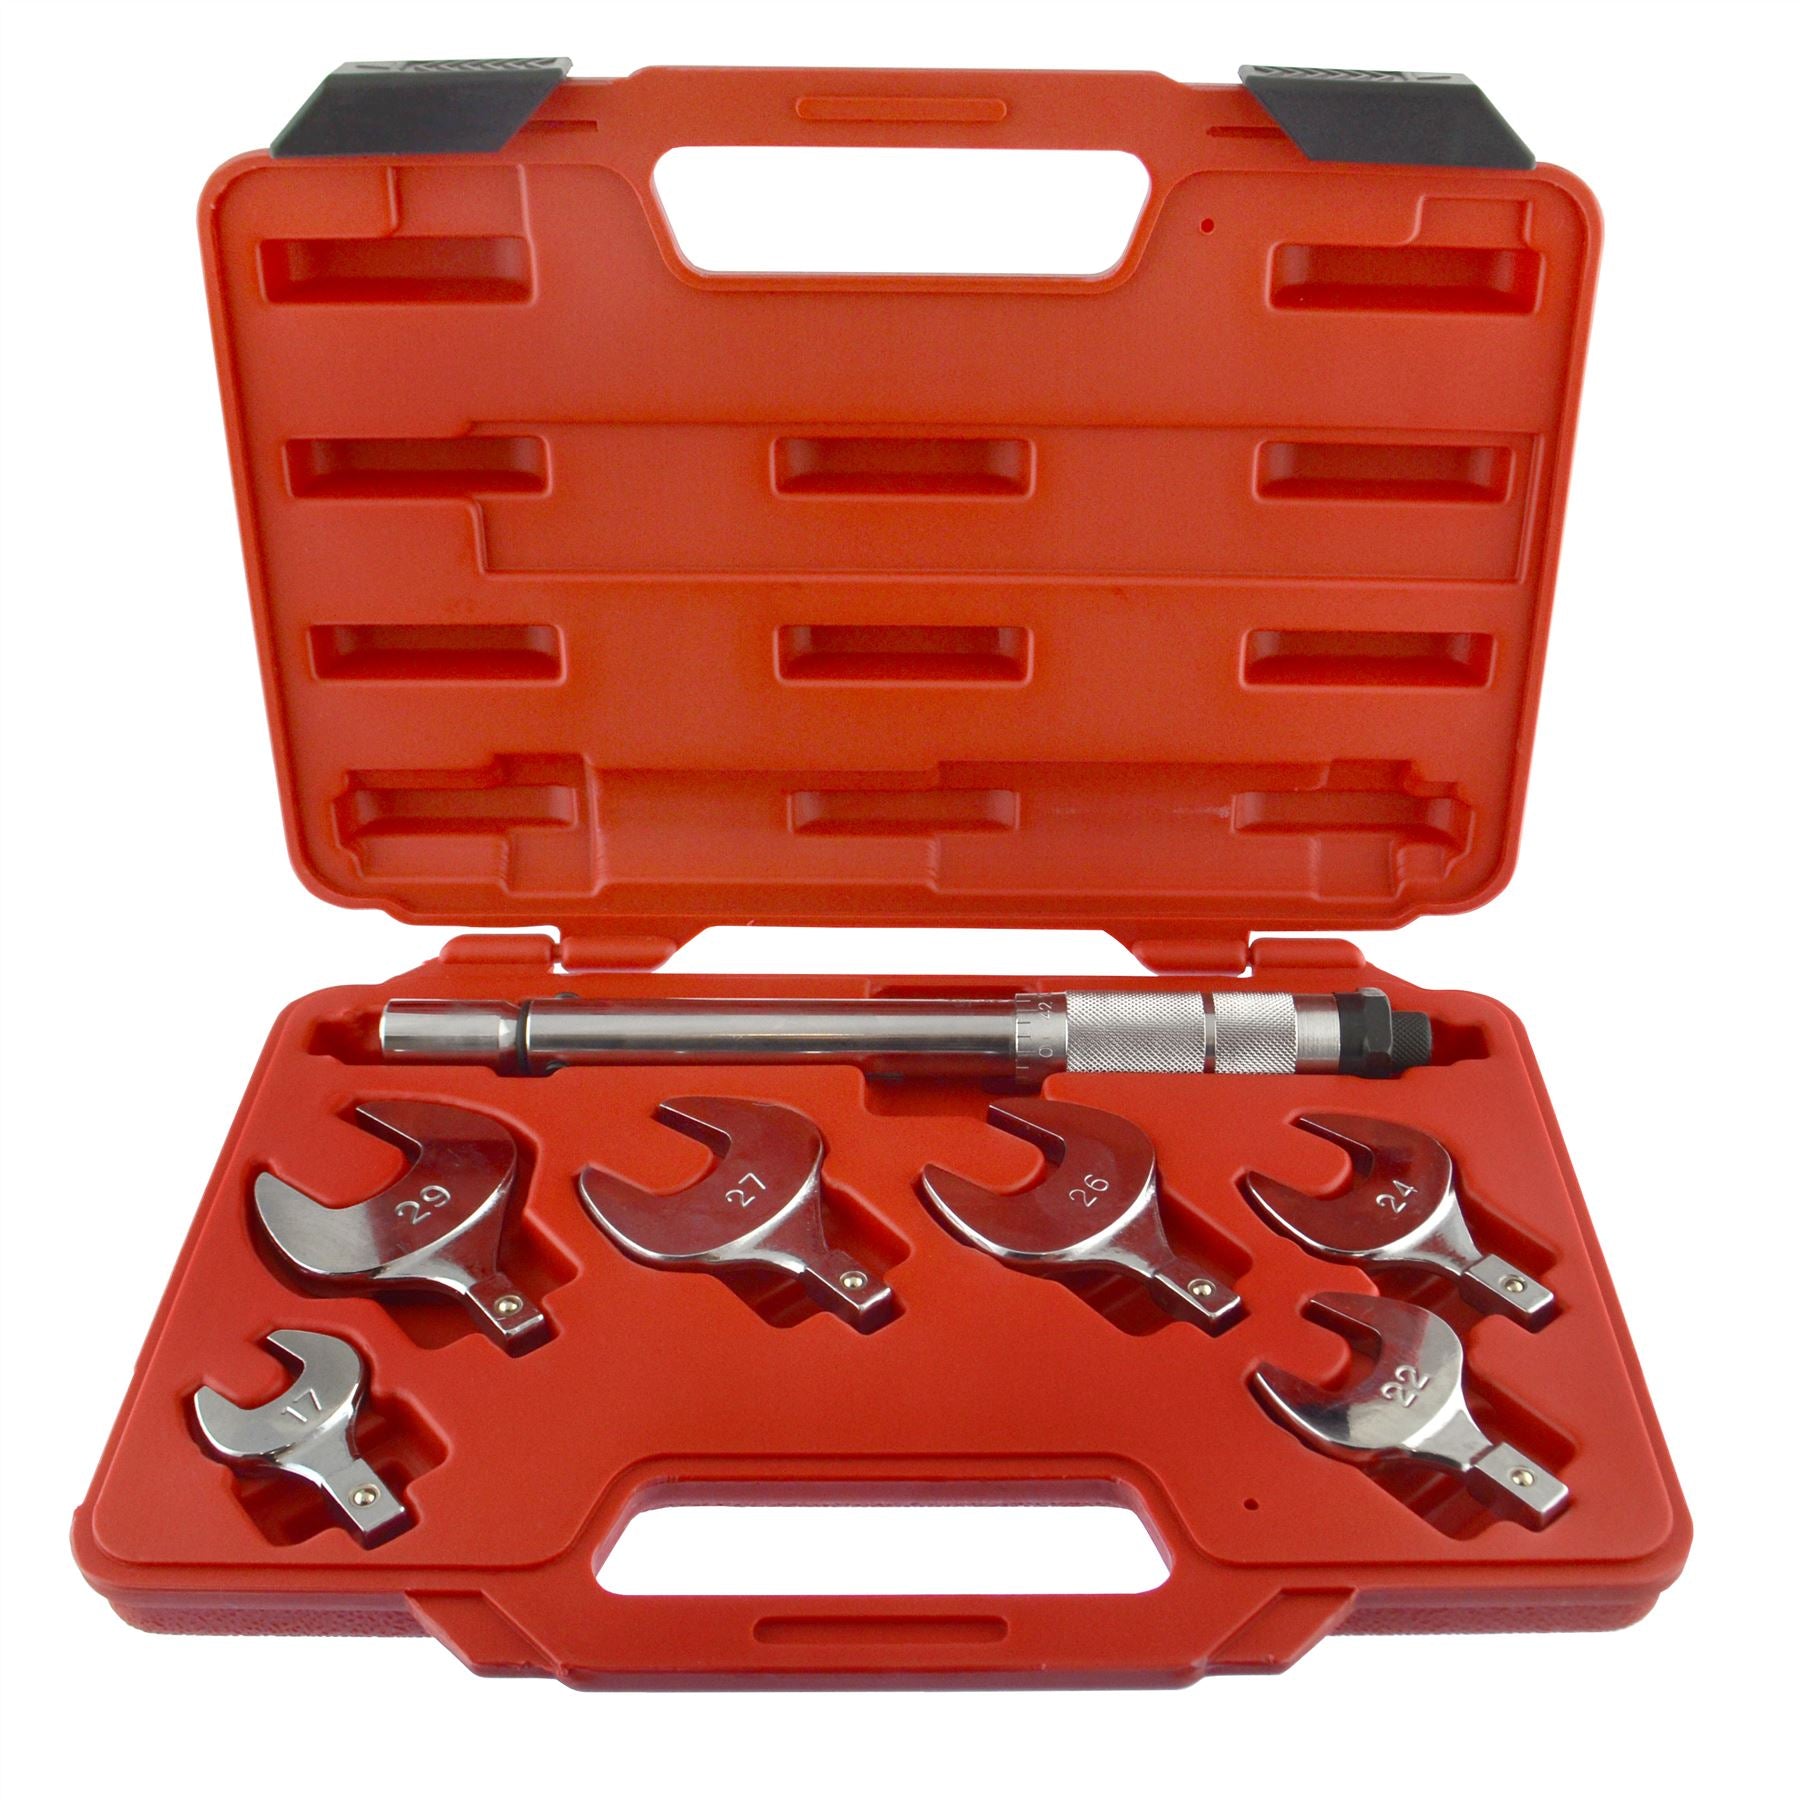 Interchangeable Torque Wrench Spanner Heads With Torque Control 17 - 29mm